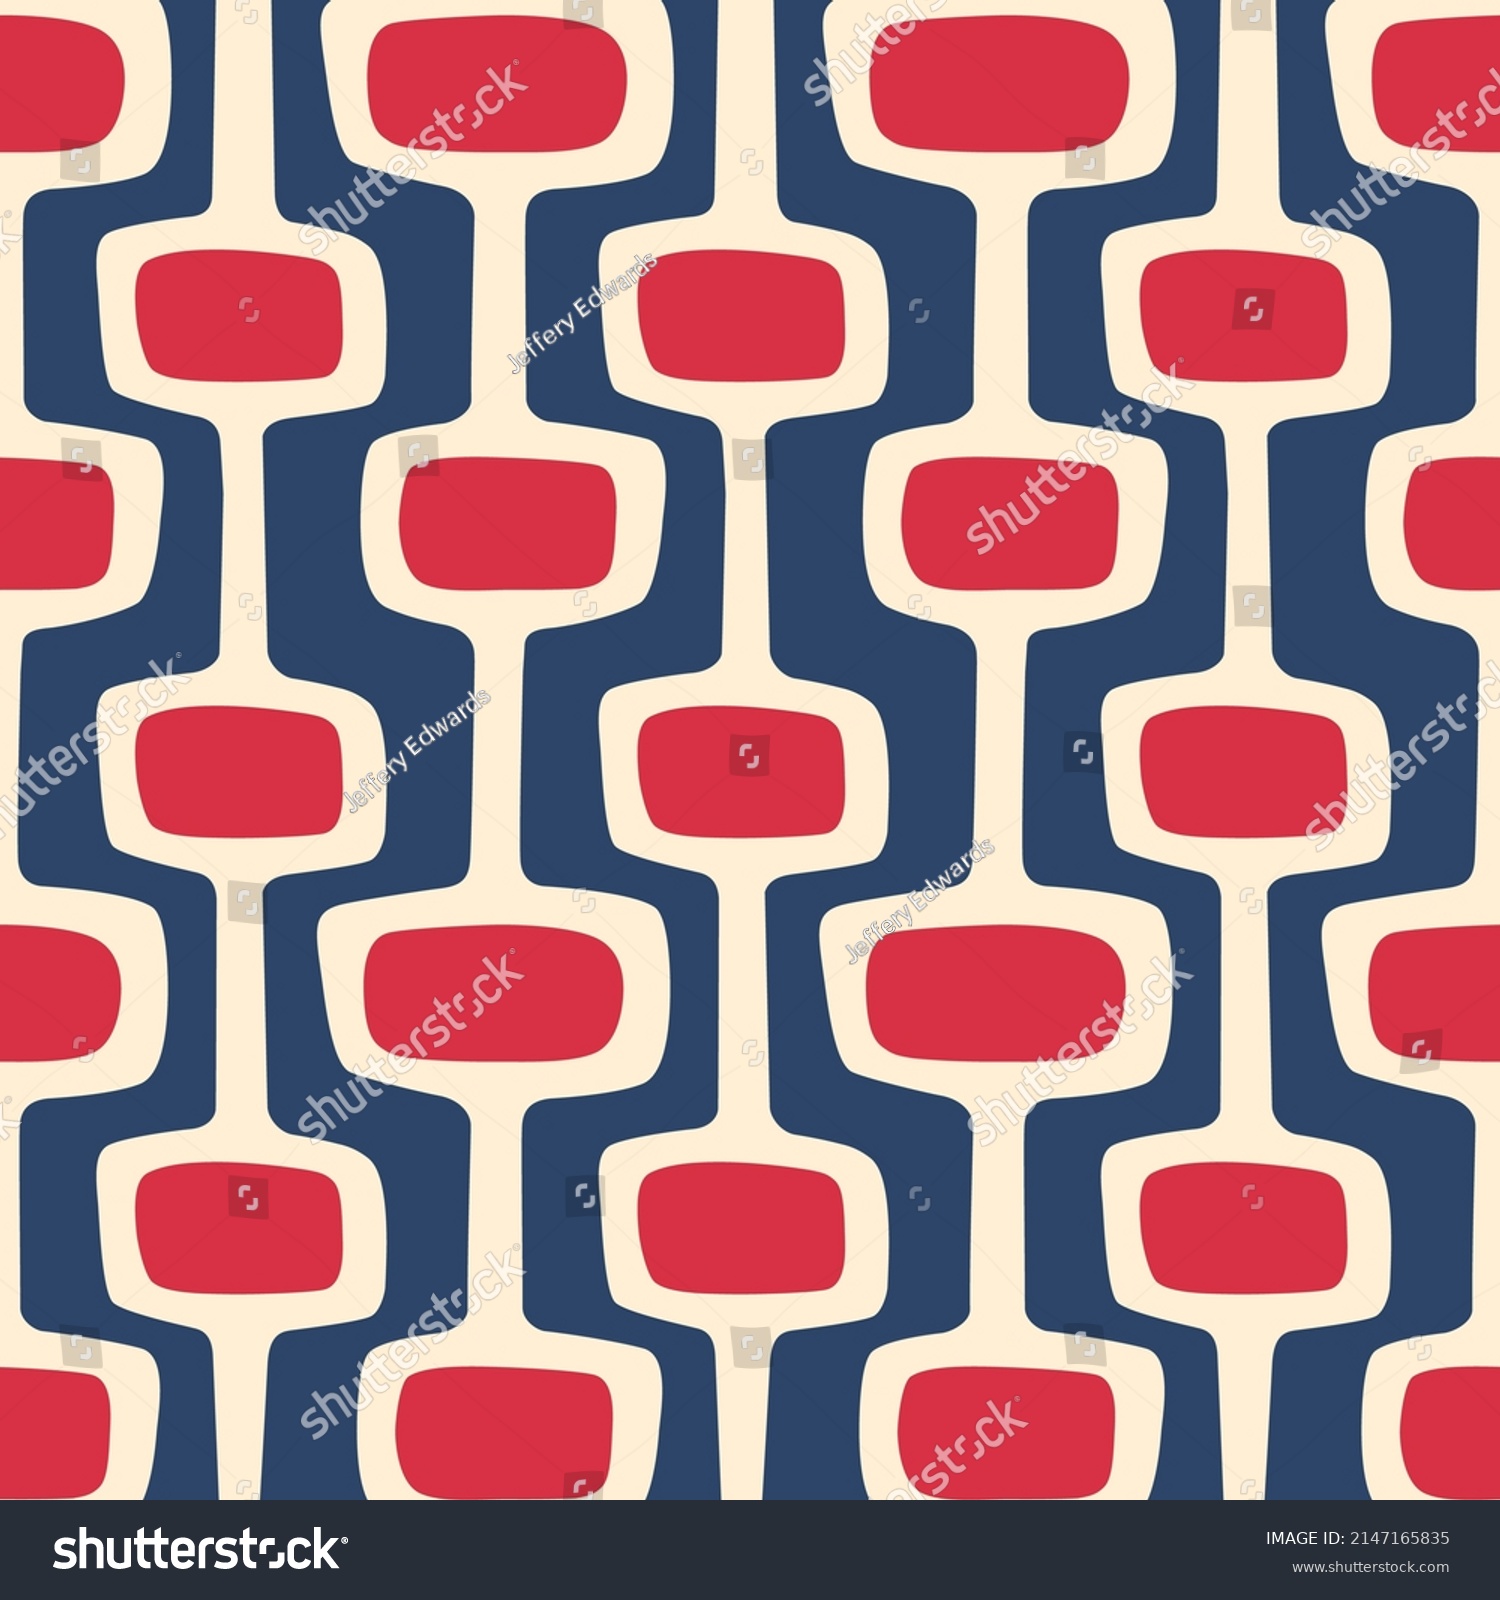 SVG of Mid-century modern atomic age background in patriotic red, white and blue. Ideal for wallpaper and fabric design. Inspired by Atomic Age in Western design.
 svg